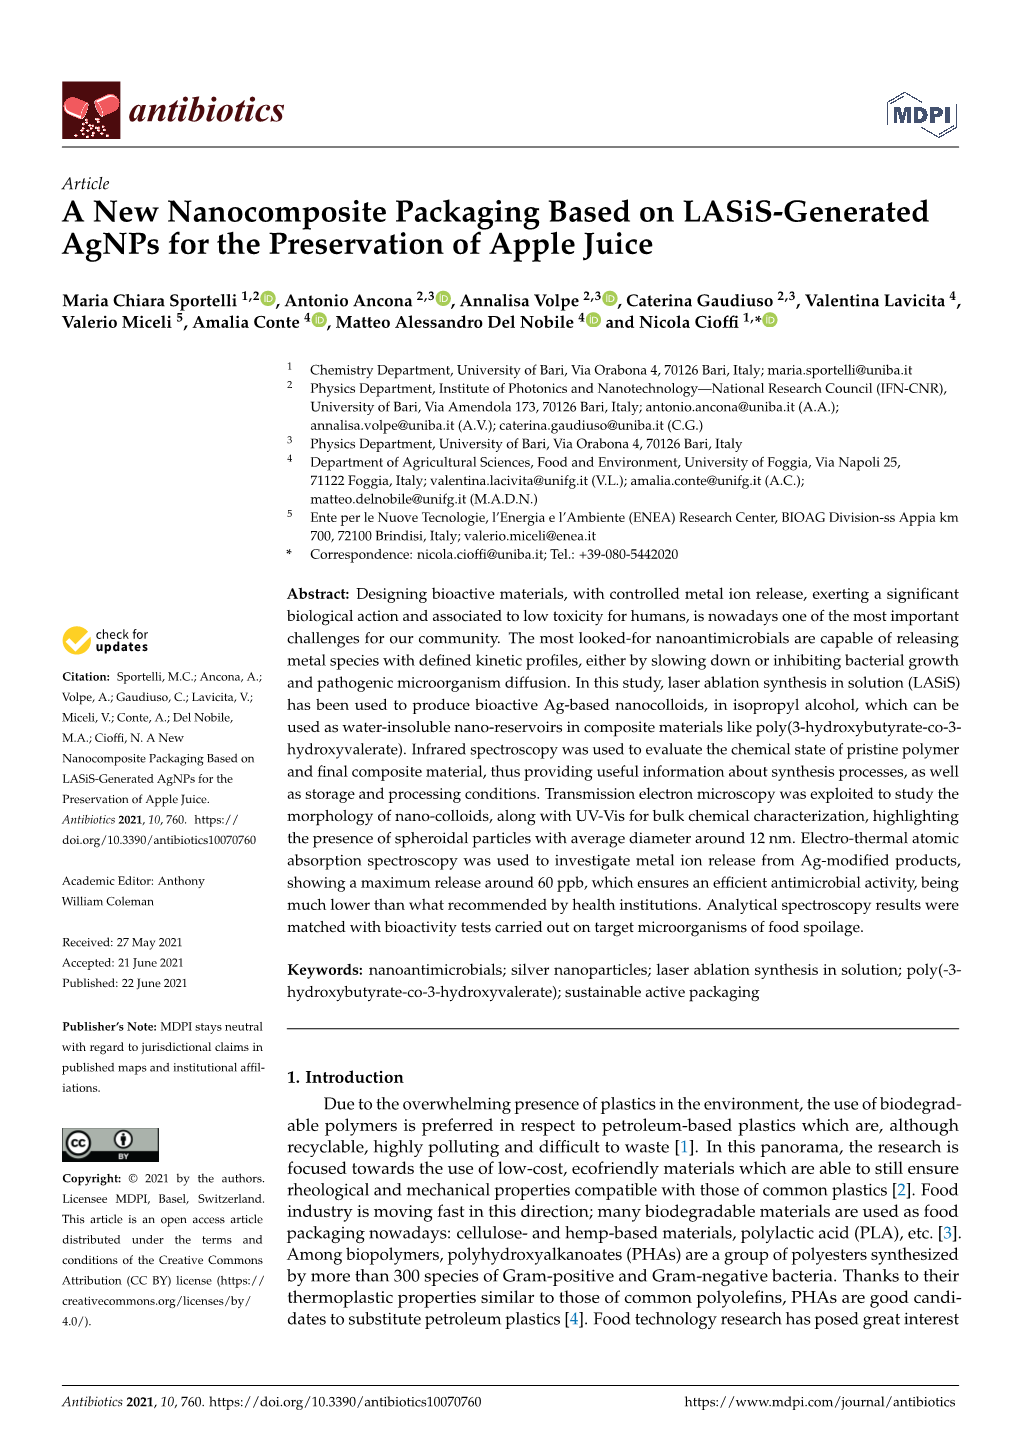 A New Nanocomposite Packaging Based on Lasis-Generated Agnps for the Preservation of Apple Juice